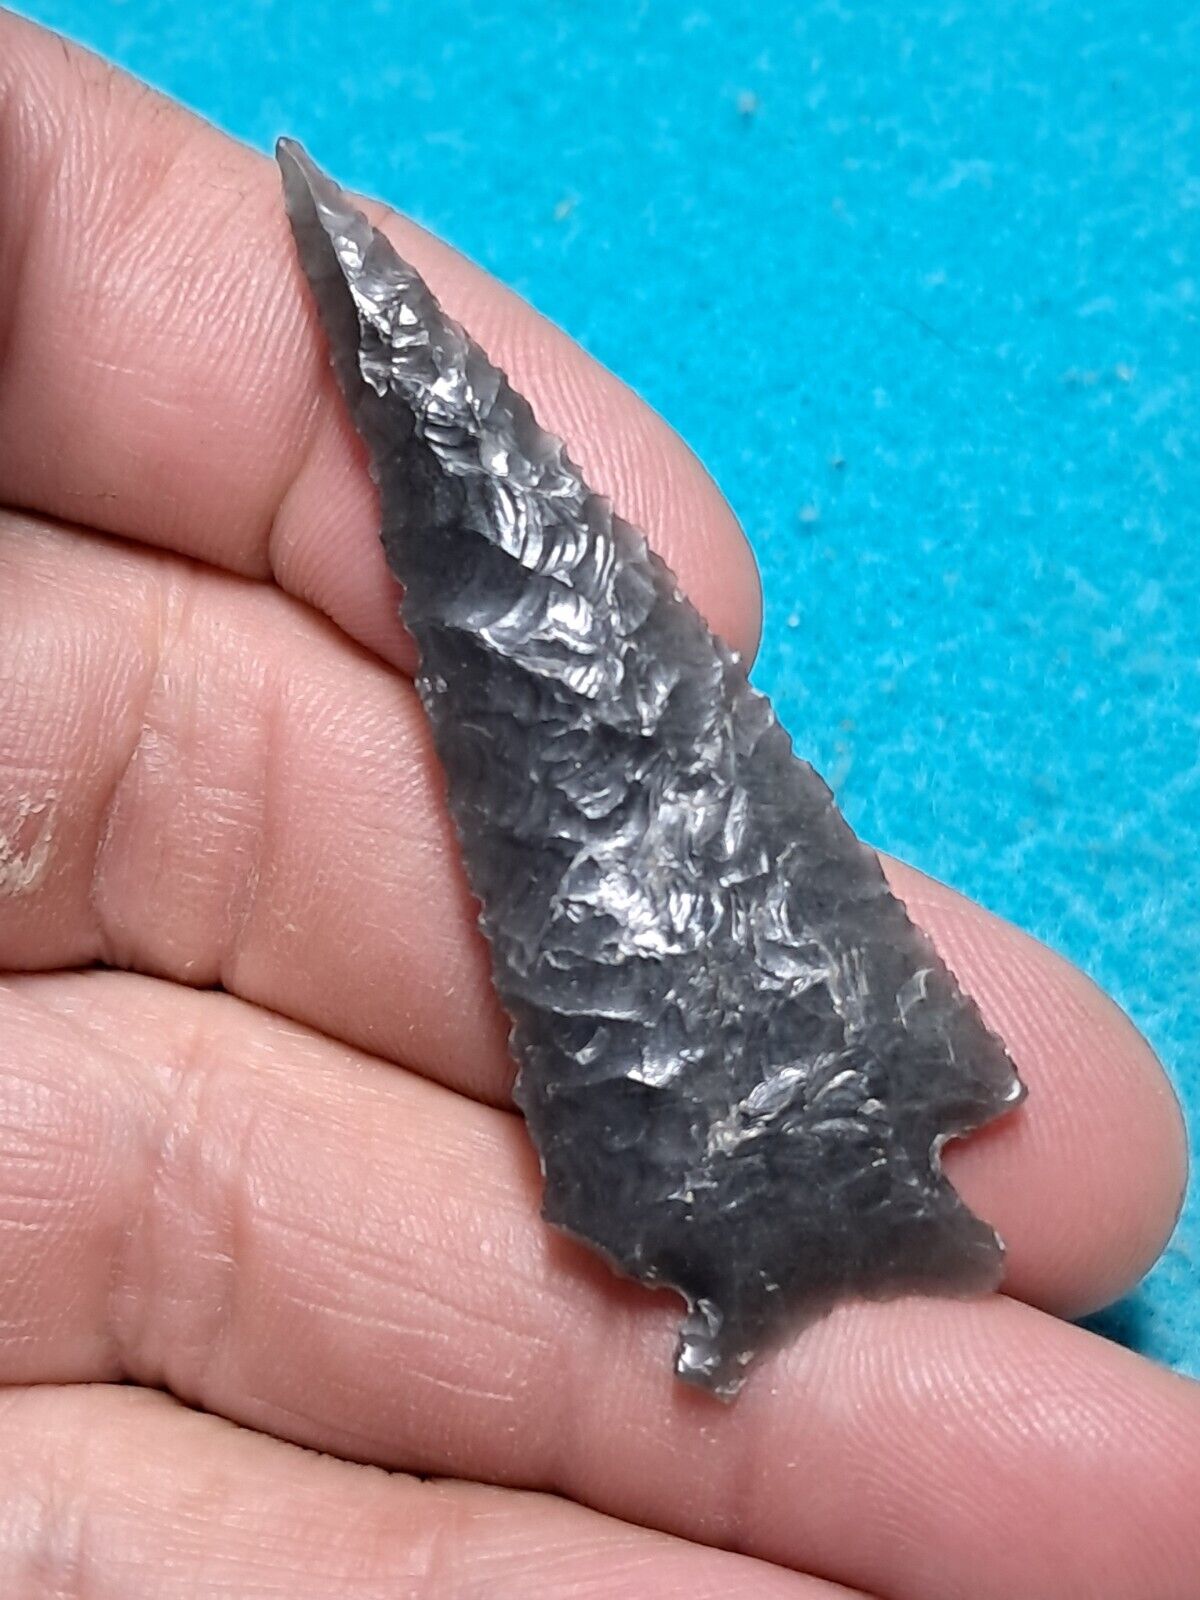 ELKO CORNERNOTCH Point Oregon Authentic Arrowheads Obsidian Artifacts Collection